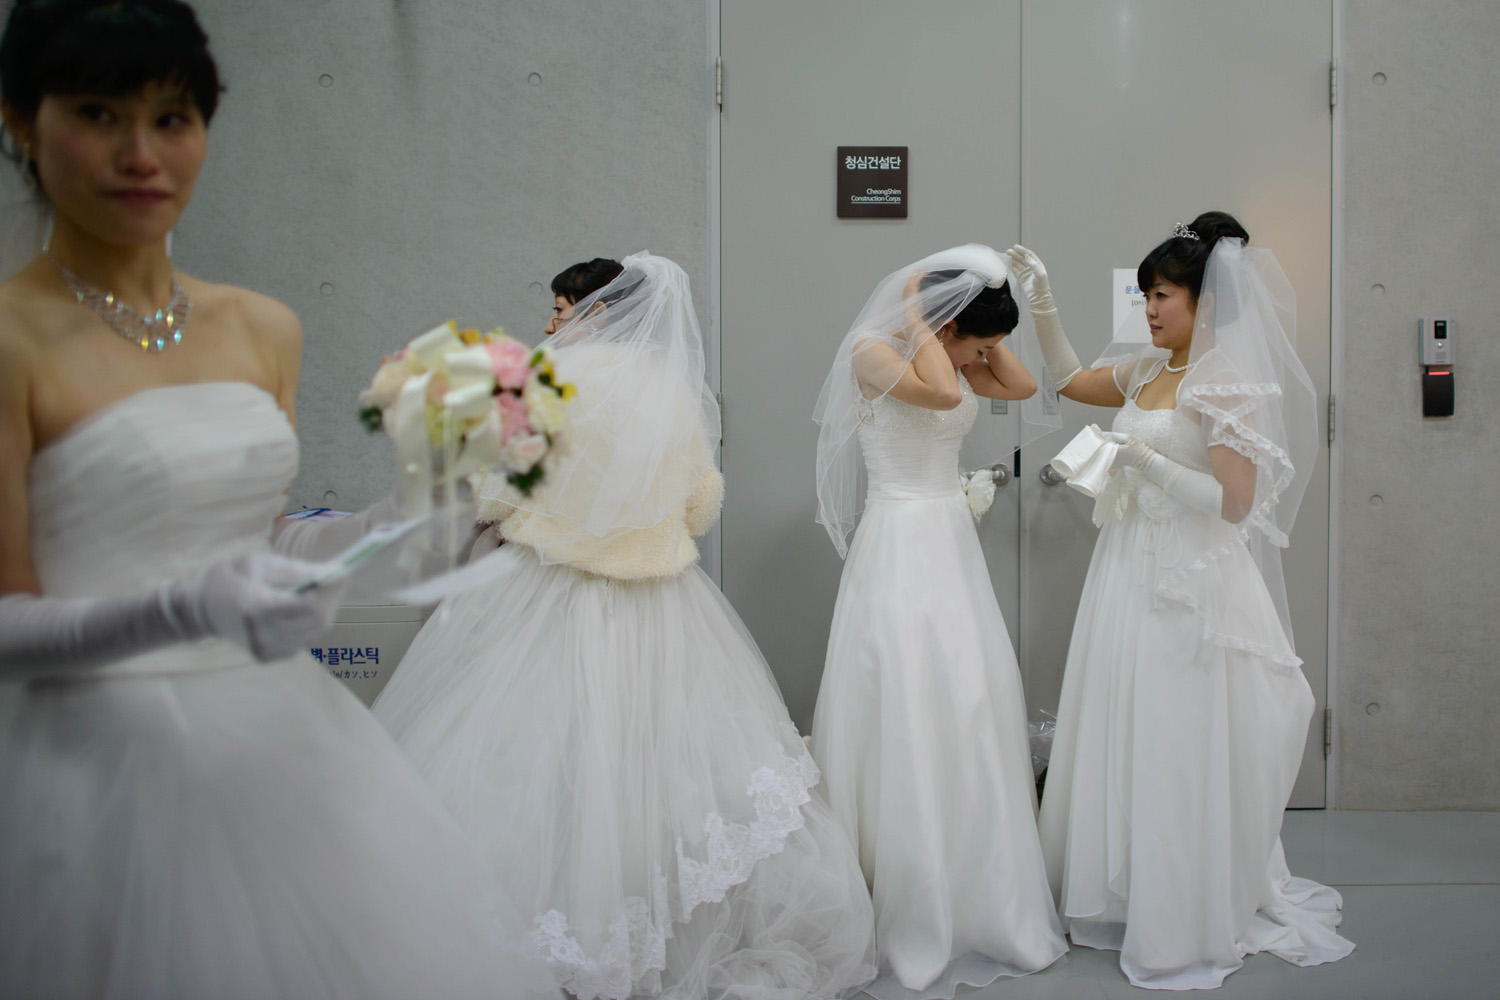 Feb. 12, 2014. Brides prepare for a mass wedding at an event held by the Unification Church in Gapyeong, South Korea.